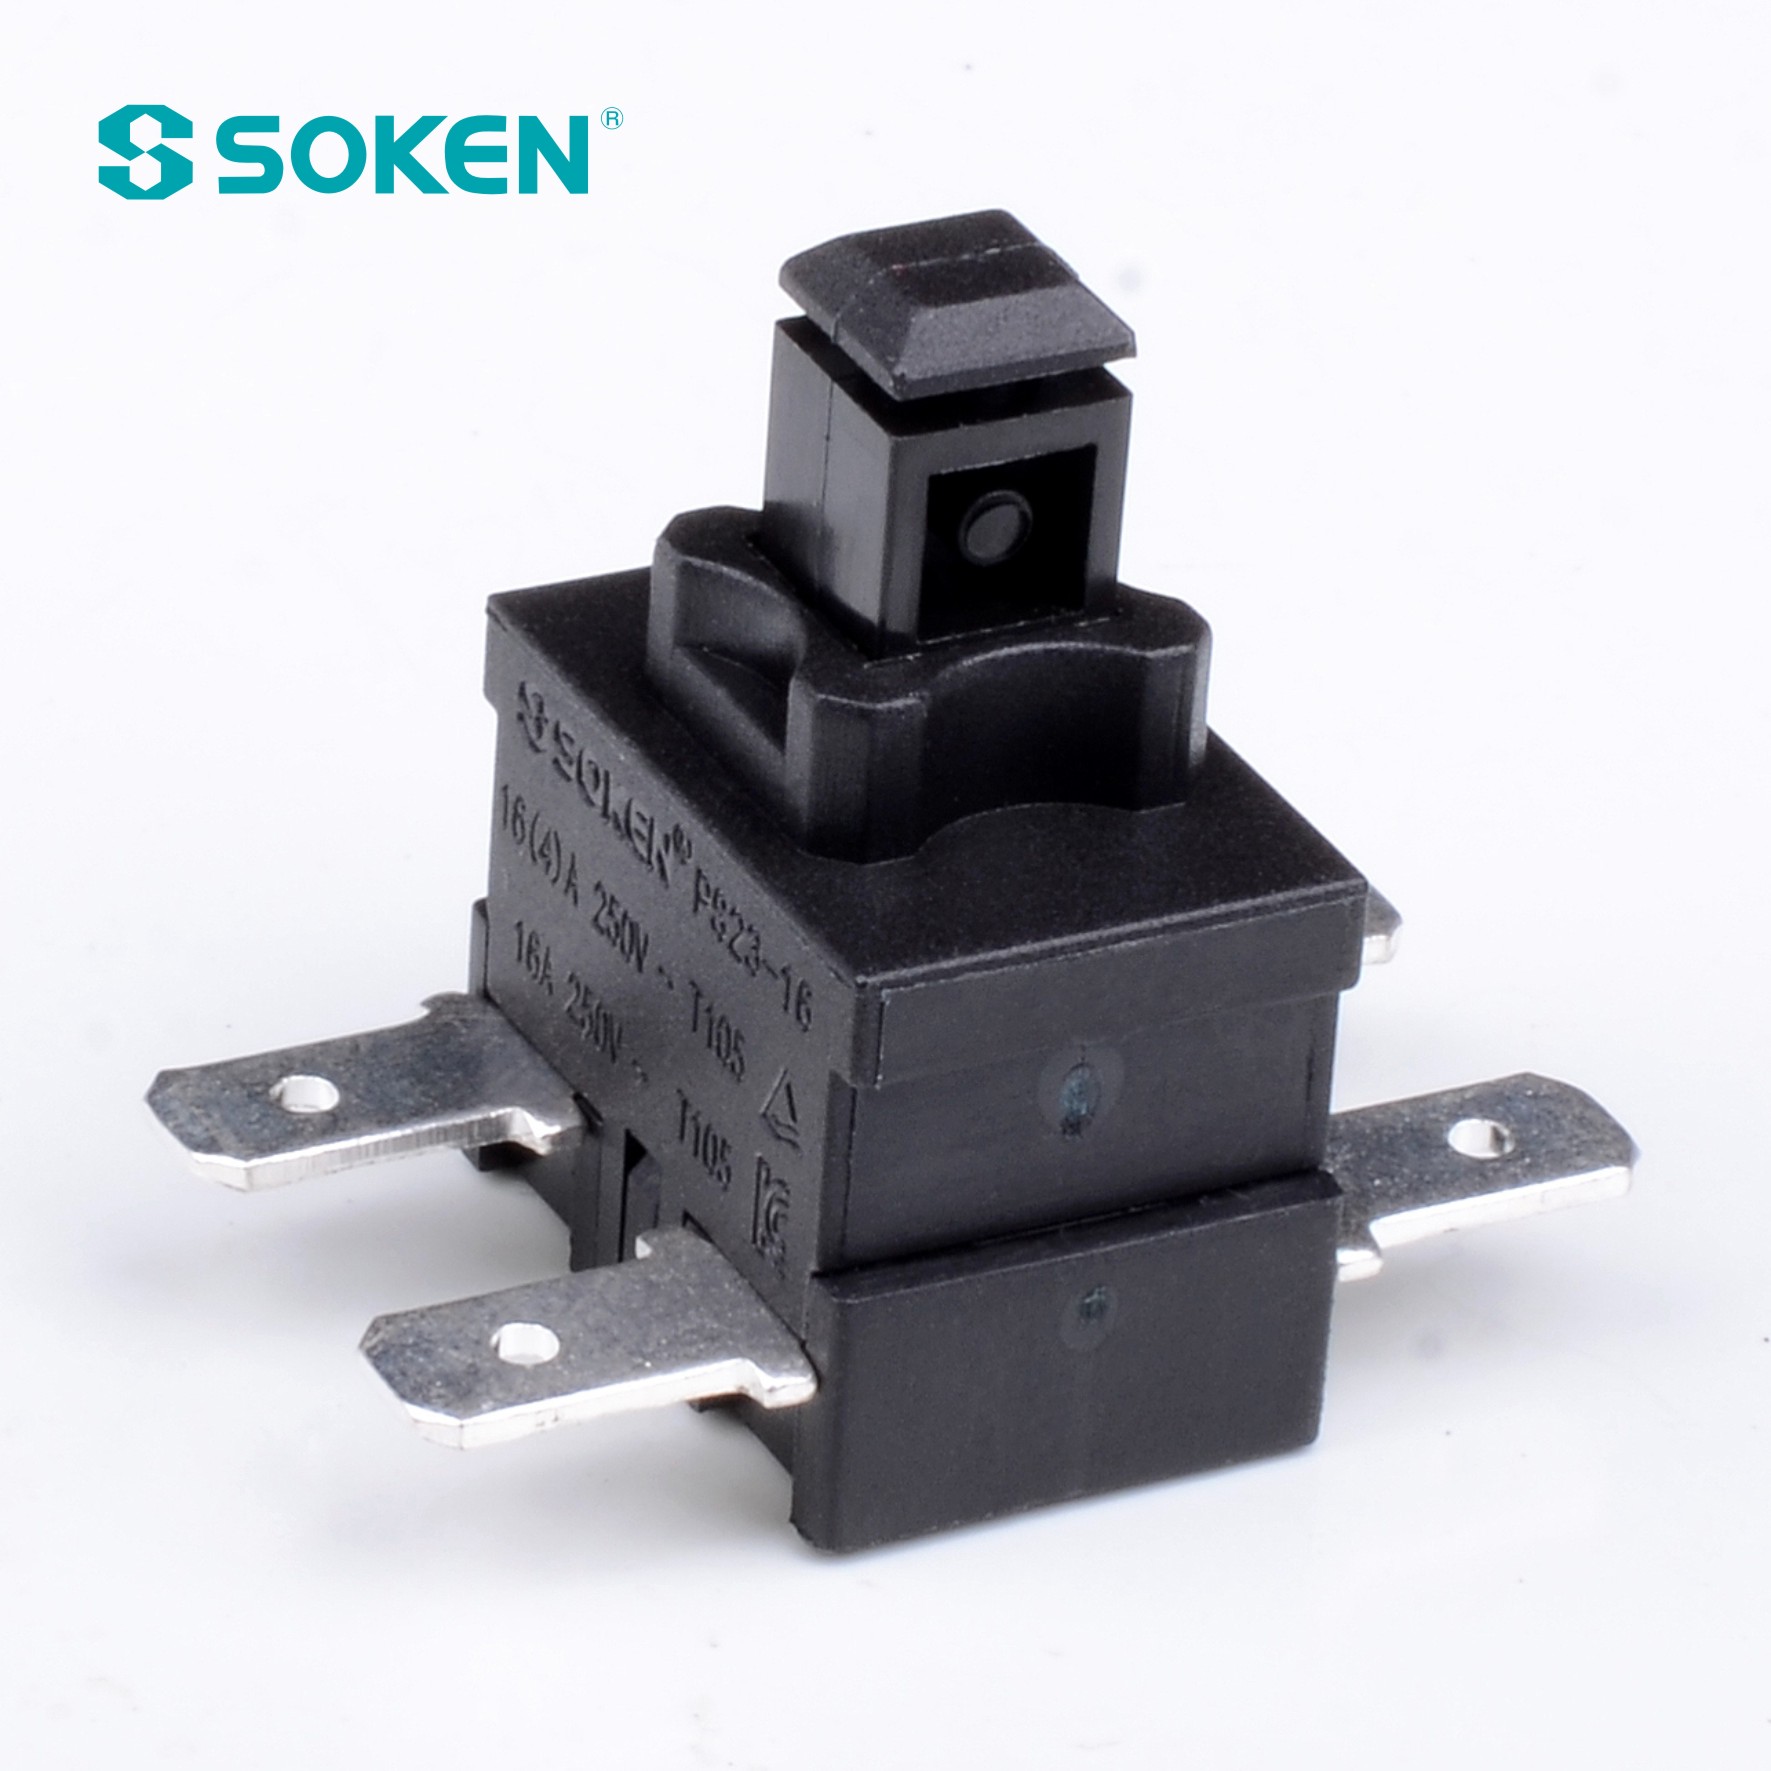 Soken vacuum Cleaner Push Button Switch 16A 1 Pole